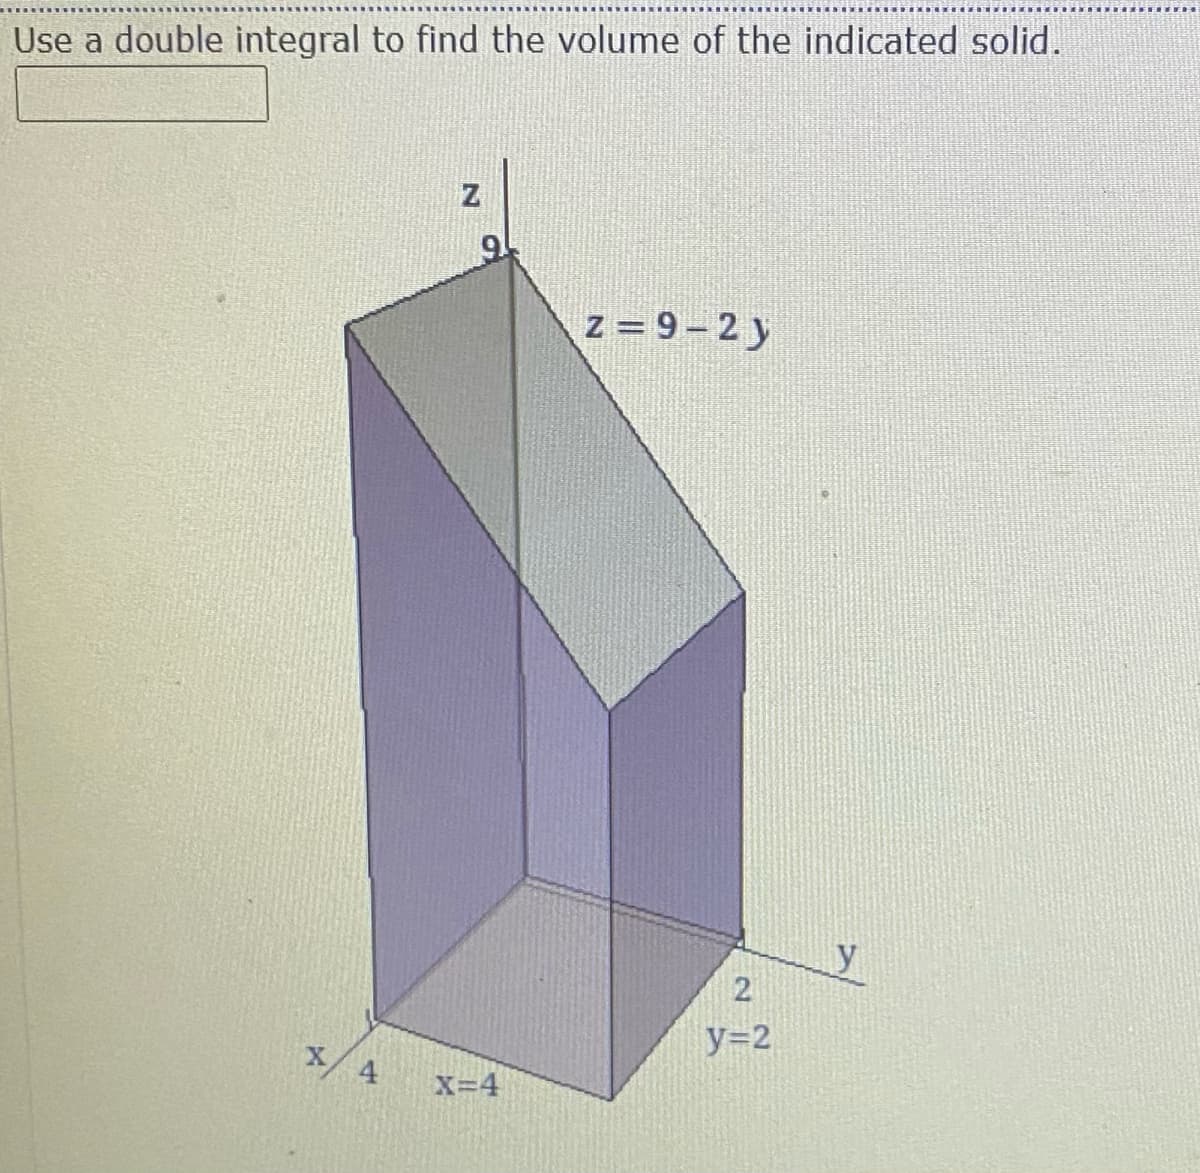 Use a double integral to find the volume of the indicated solid.
z = 9-2y
y=2
X
4
X=4
